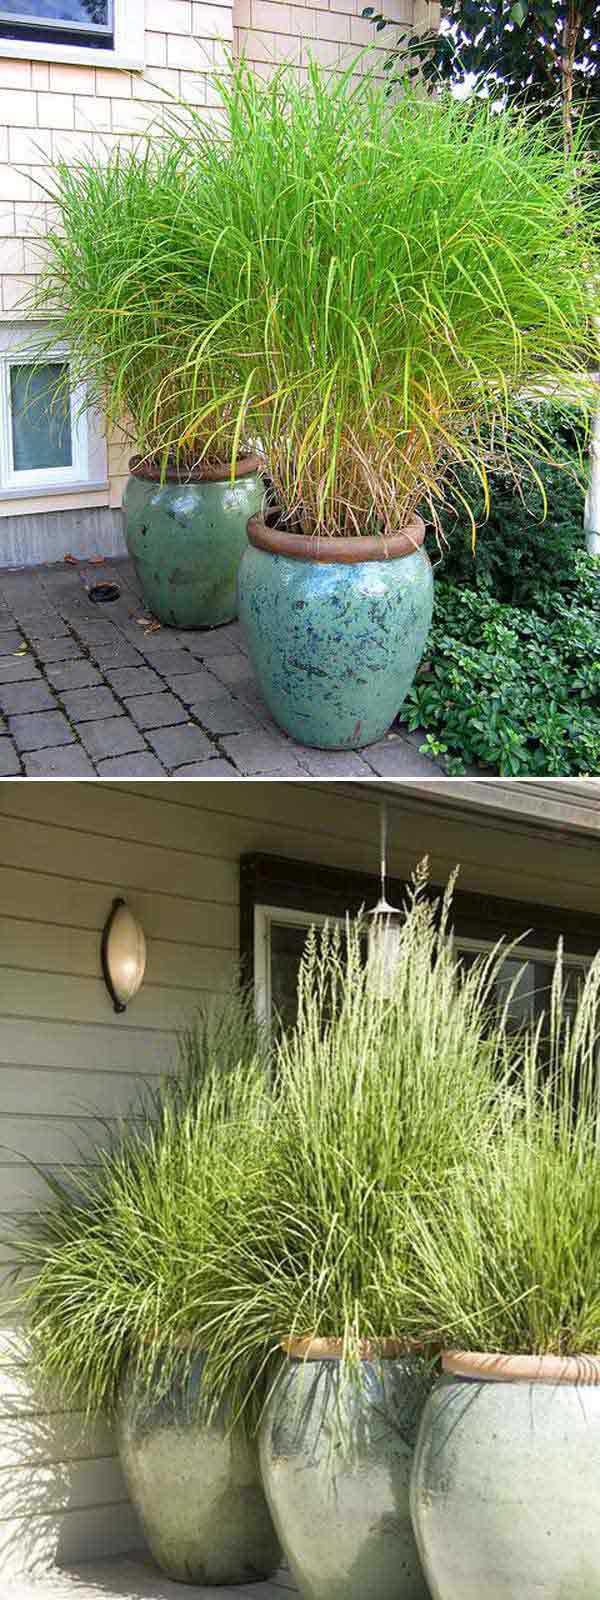 Add Privacy to Your Garden or Yard with Plants - Amazing ...